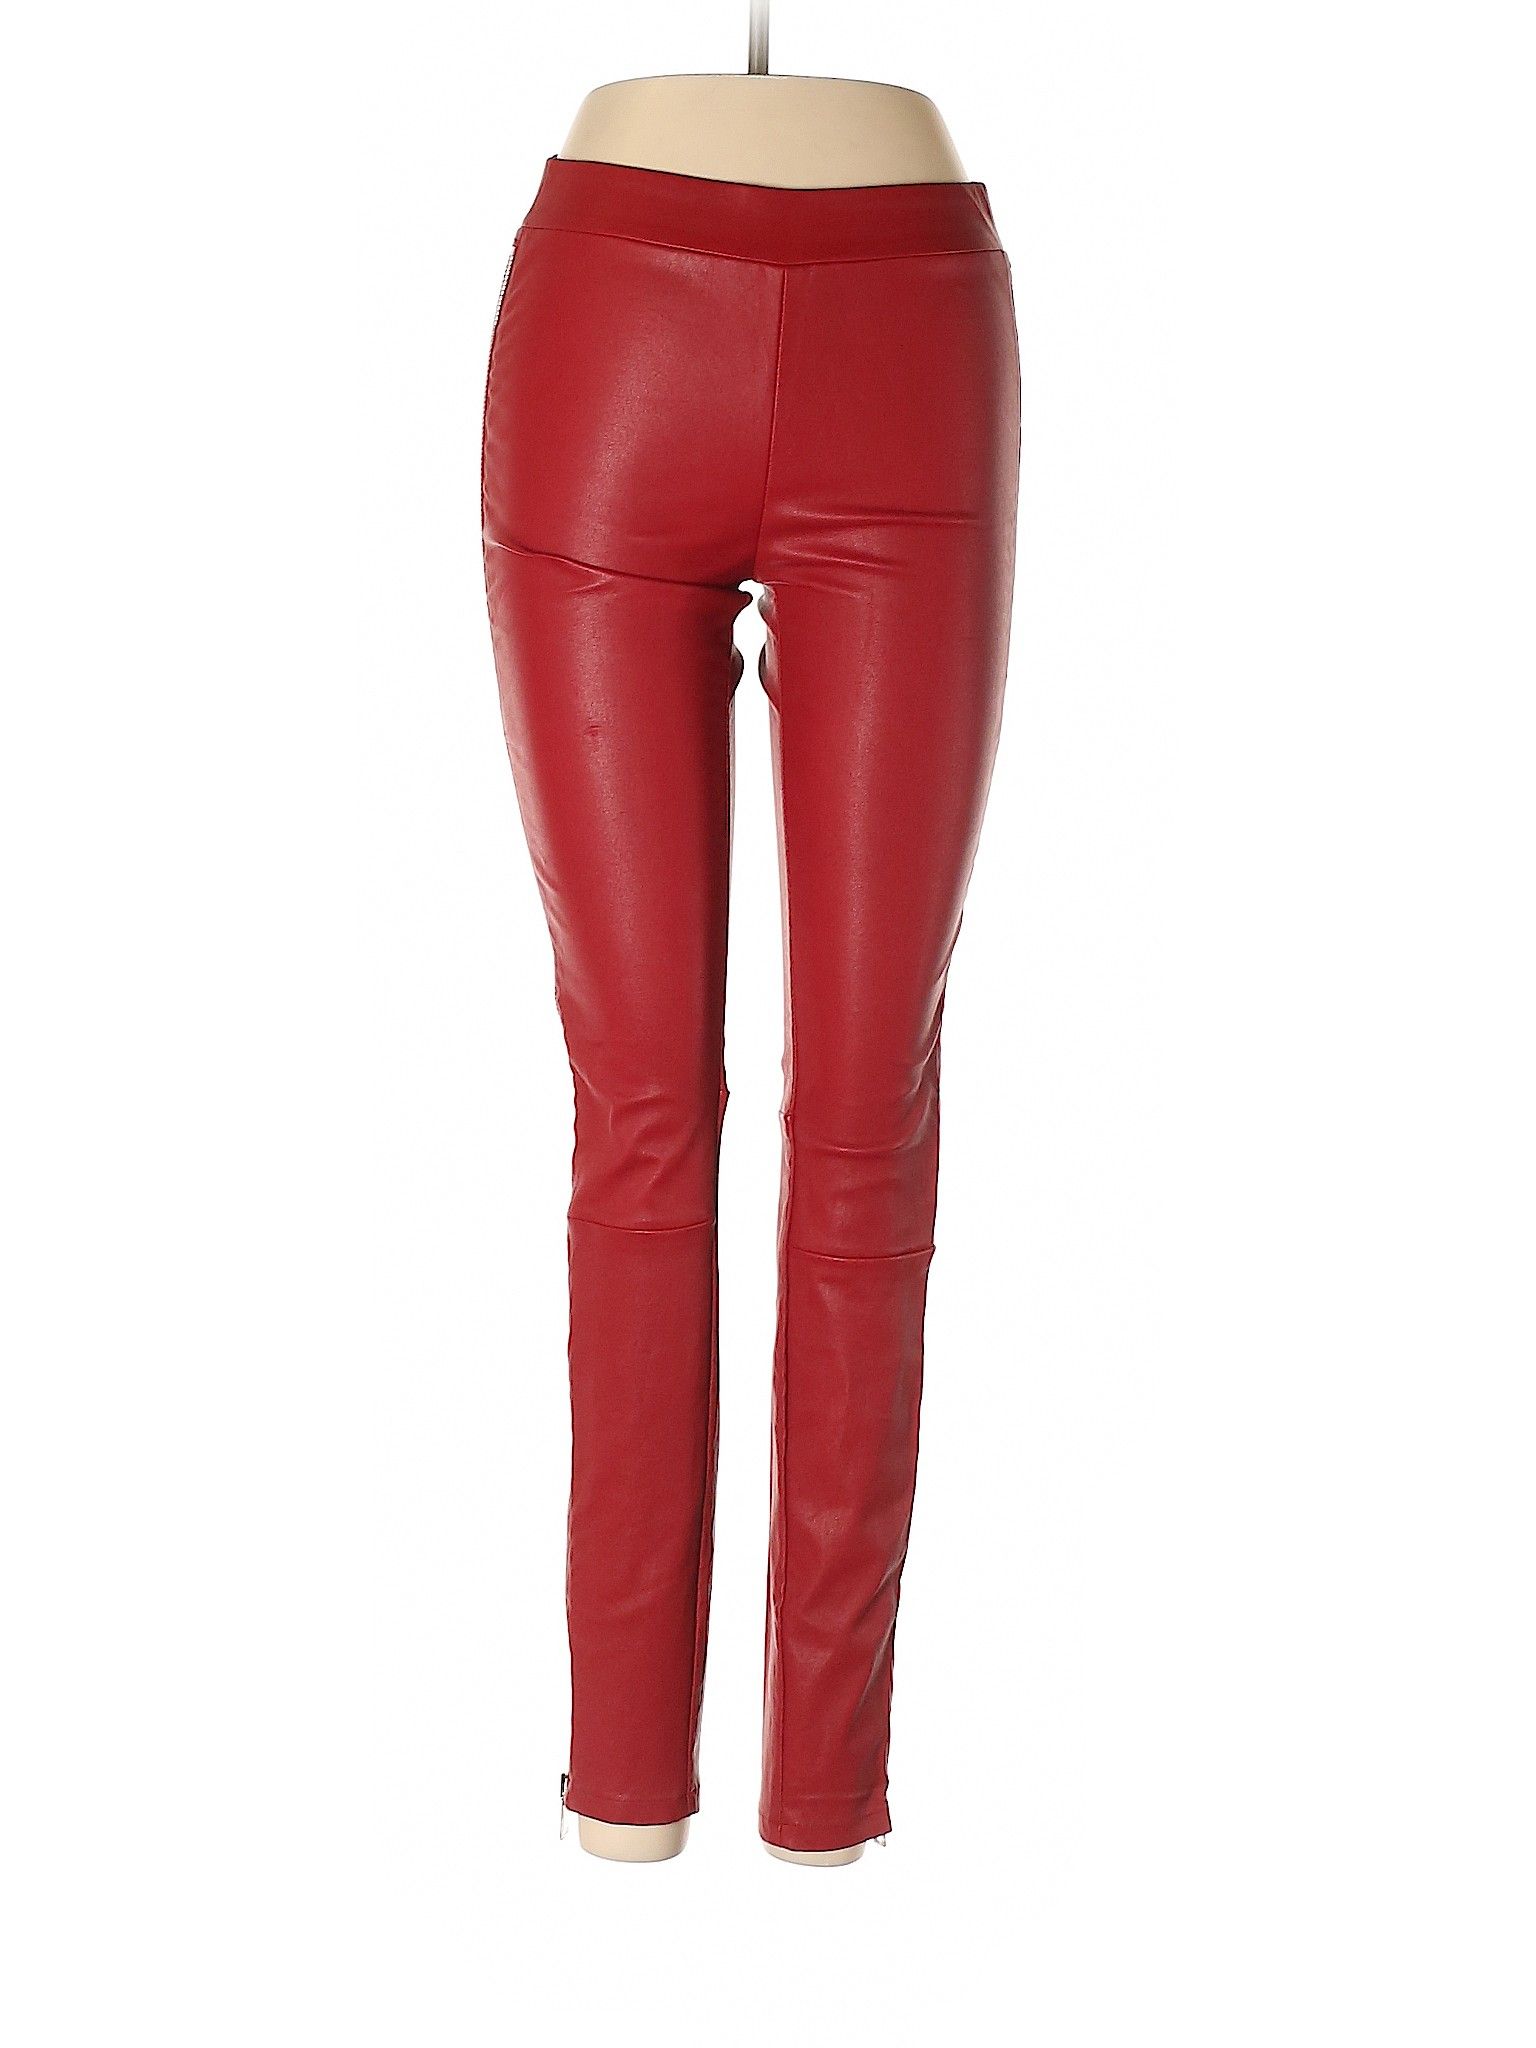 Vince. Leather Pants Size 4: Red Women's Bottoms - 43879153 | thredUP